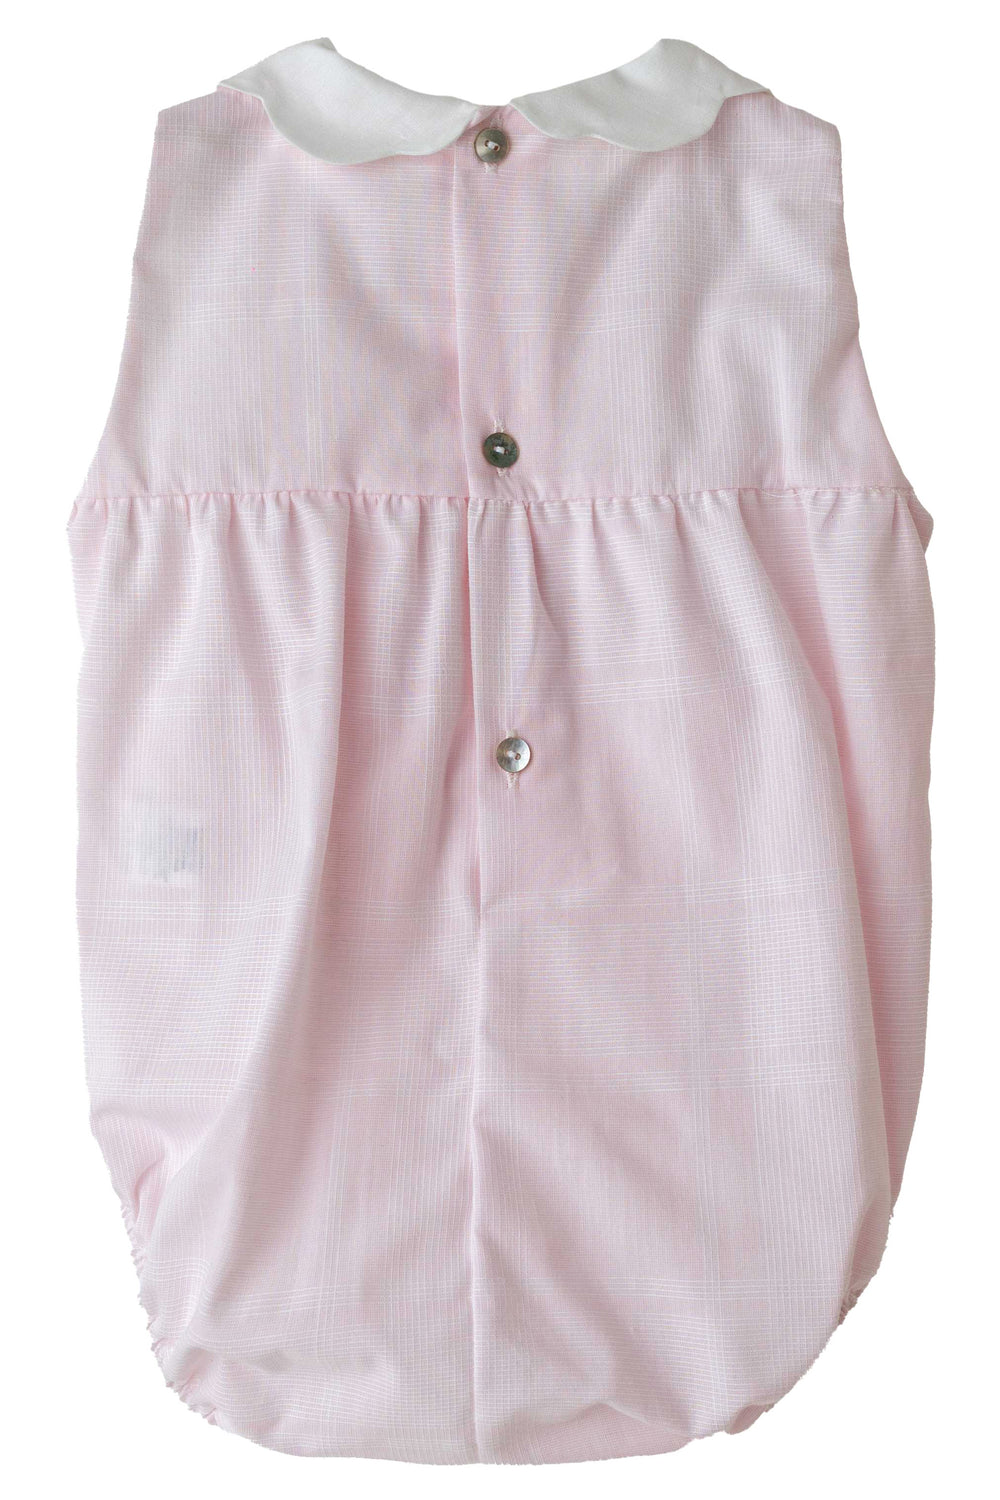 Baby Gi "Edith" Pink Checked Romper | Millie and John